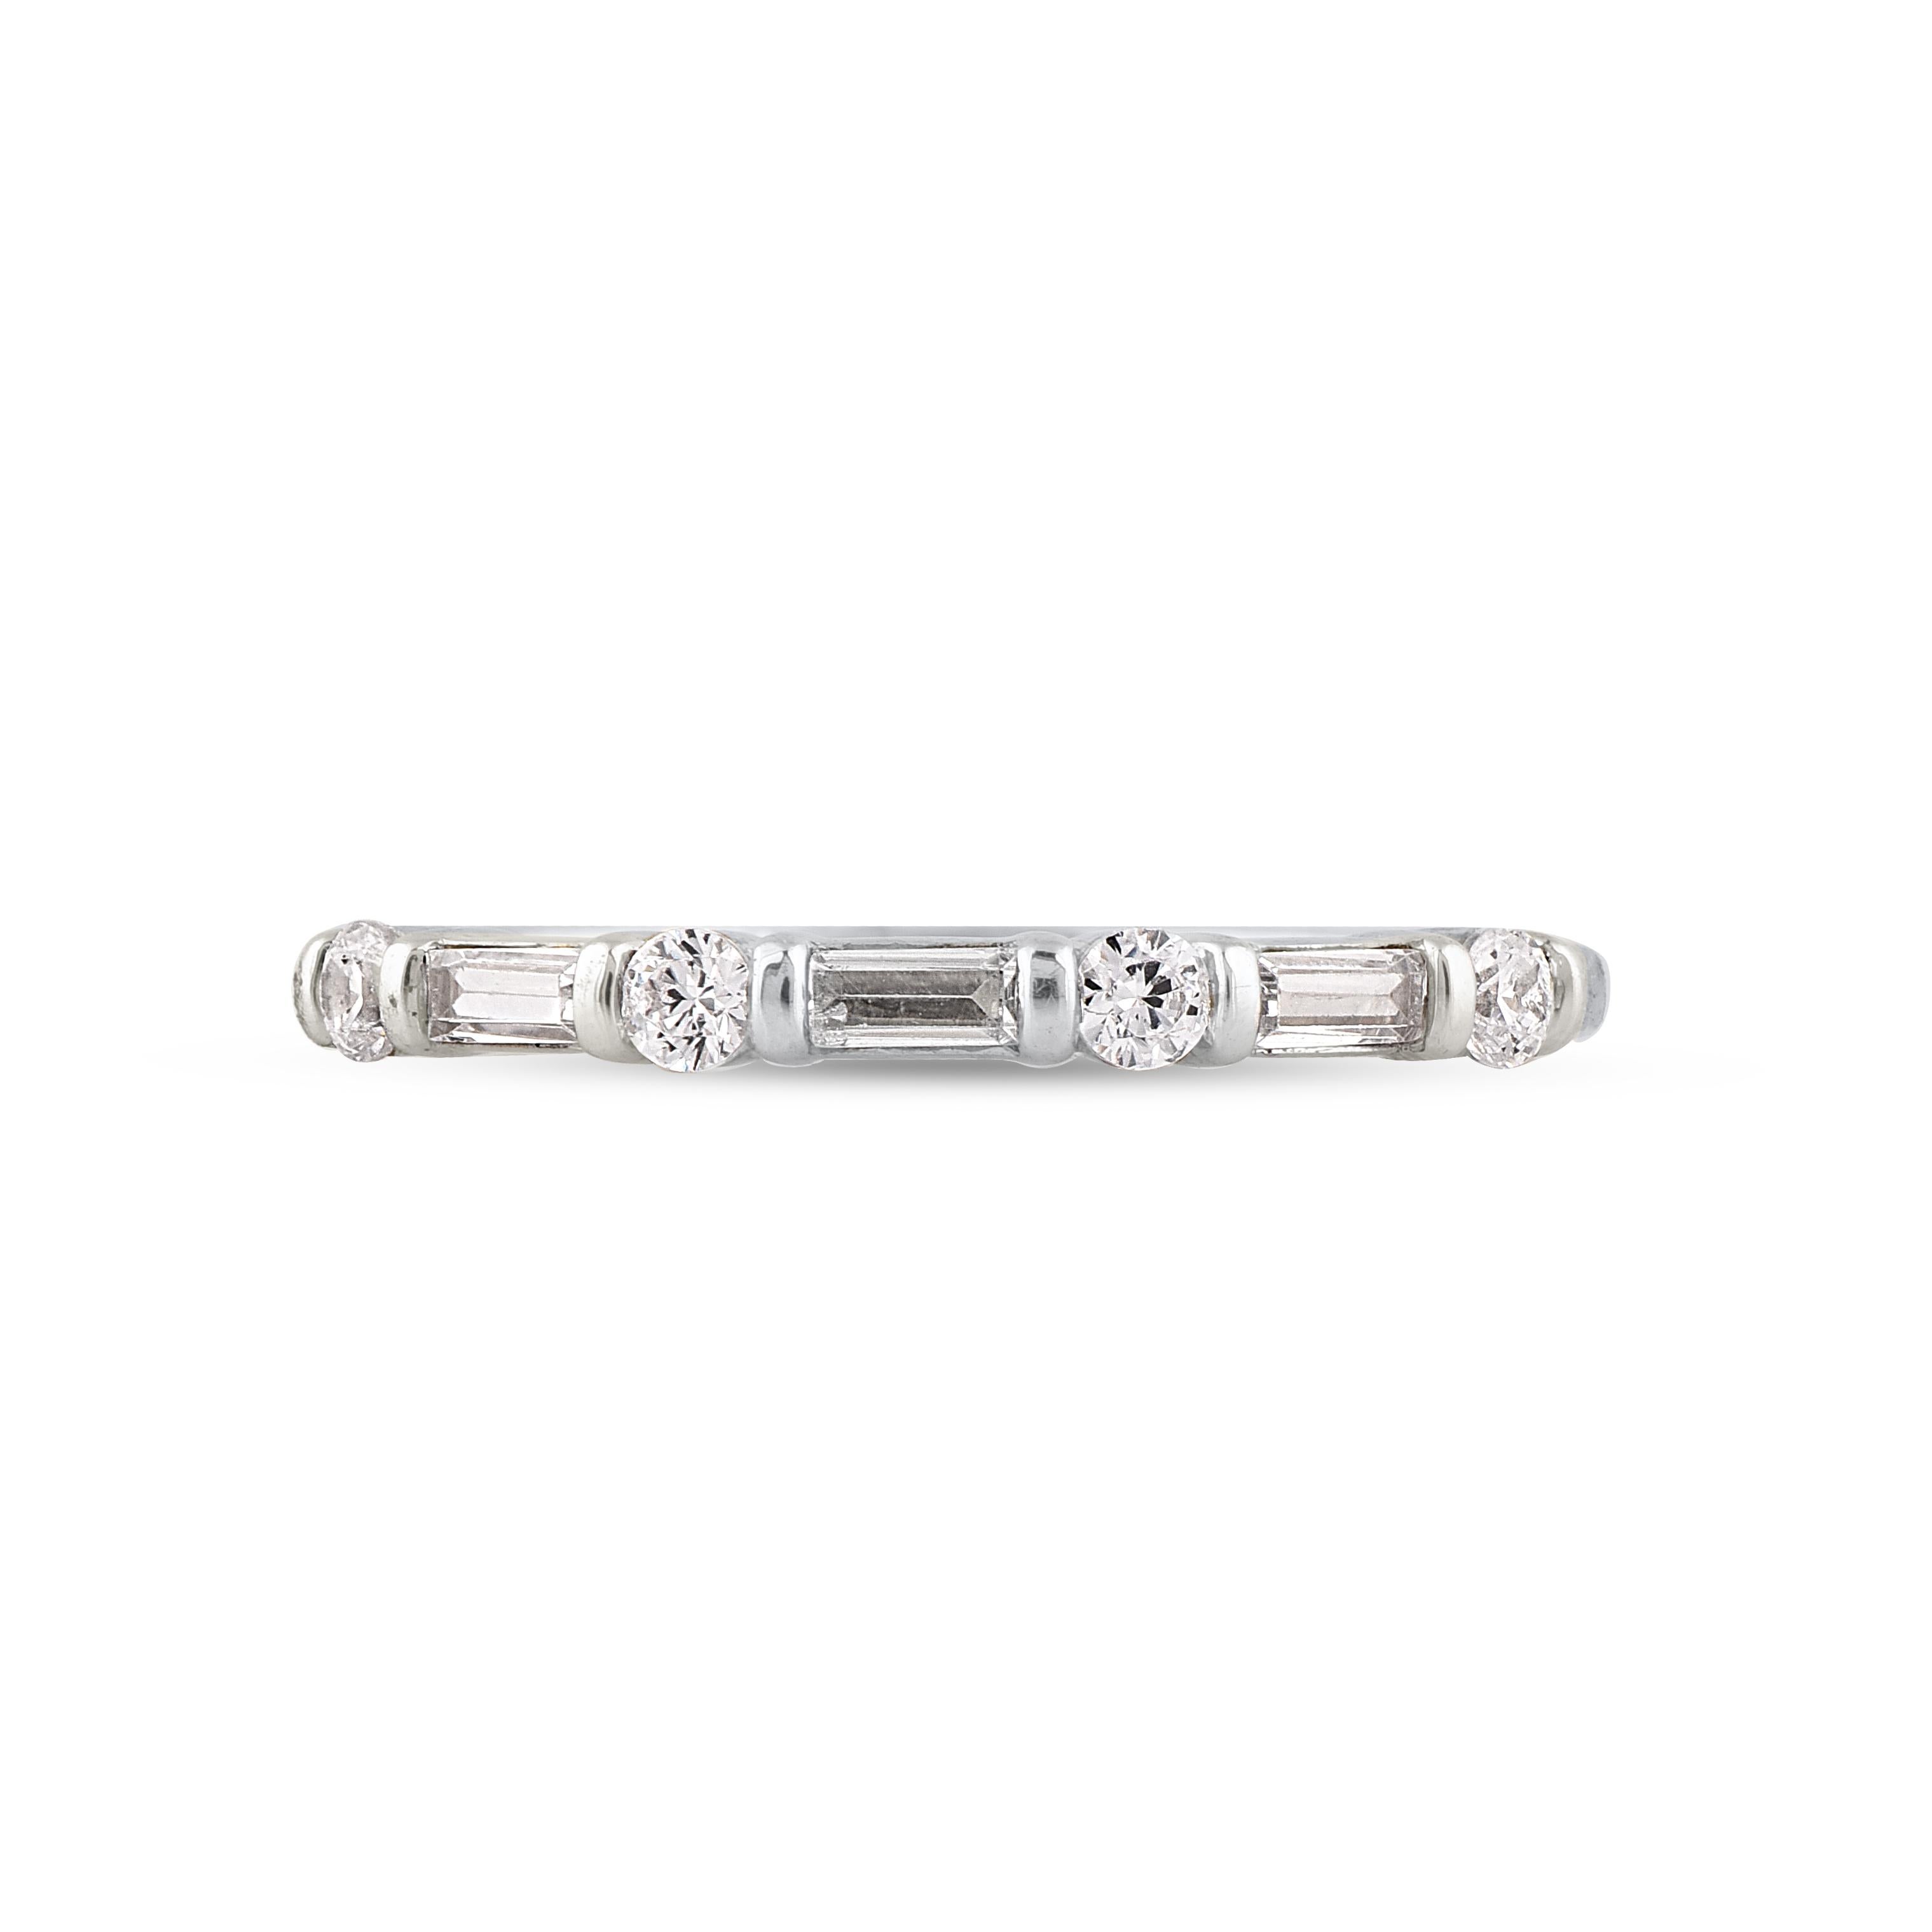 Honor your special day with this exceptional diamond band ring. This band ring features a sparkling 4 brilliant cut round diamonds and 3 baguette cut diamonds beautifully set in channel setting. The total diamond weight is 0.50 Carat. The diamonds